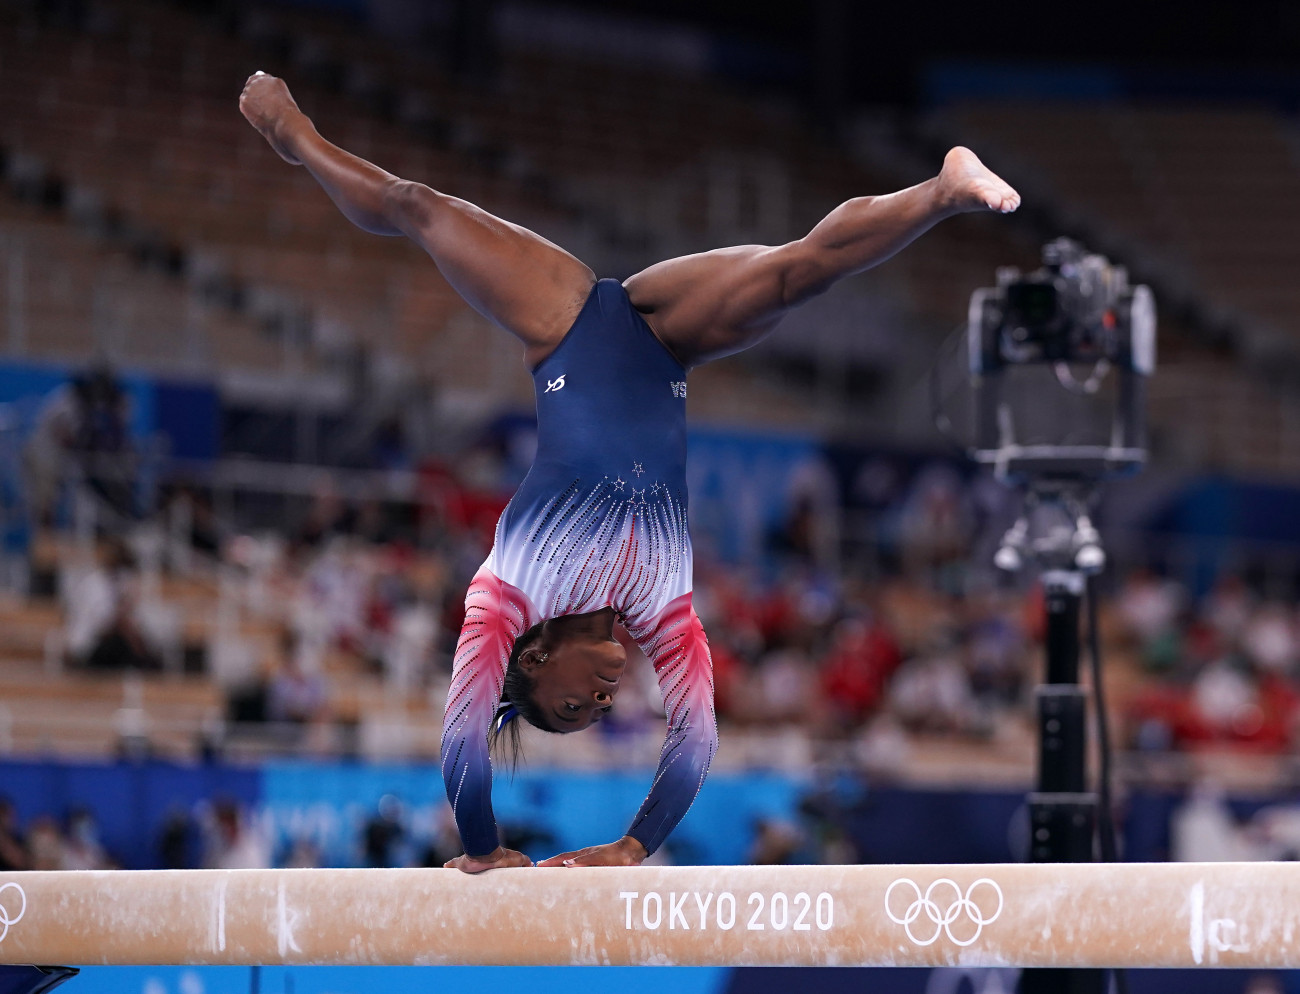 USA's Simone Biles in the Women's Balance Beam Final at Ariake Gymnastic Centre on the eleventh day of the Tokyo 2020 Olympic Games in Japan. Picture date: Tuesday August 3, 2021. (Photo by Mike Egerton/PA Images via Getty Images)